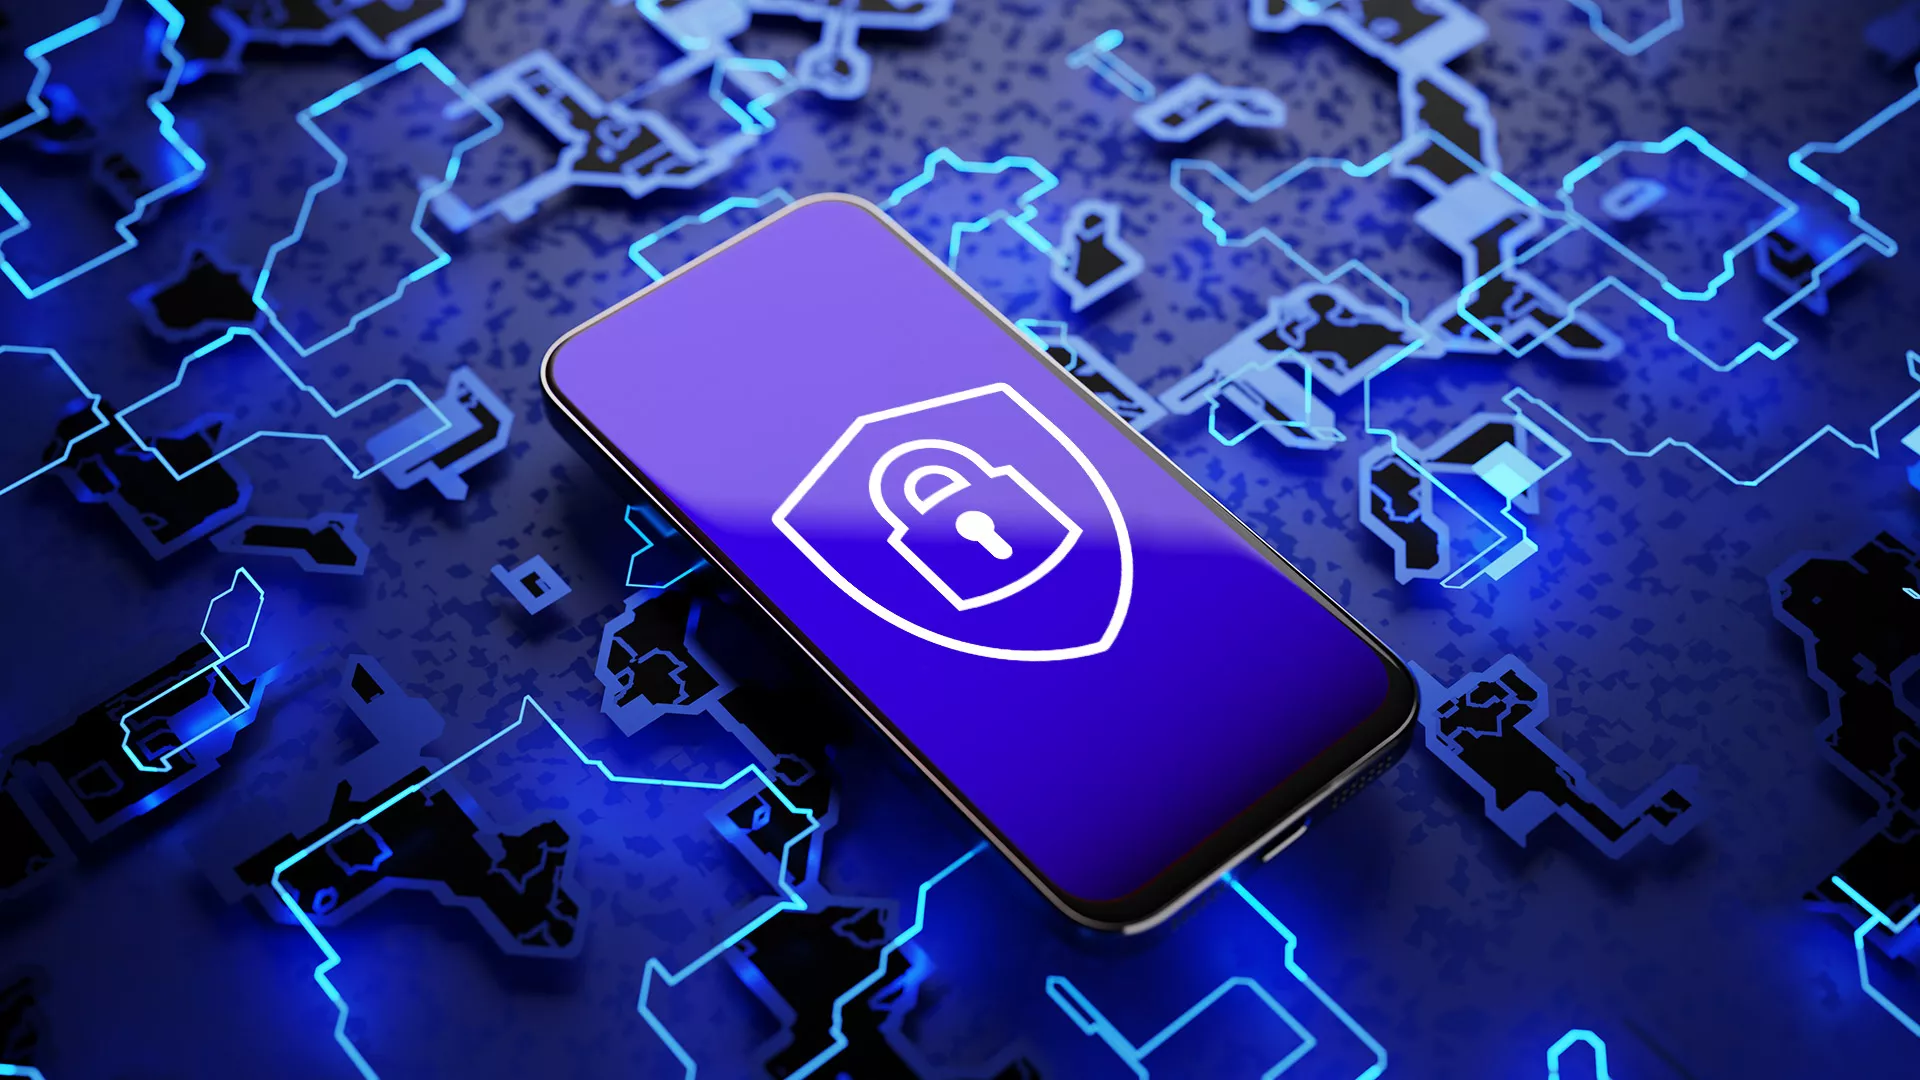 Device Identity protection